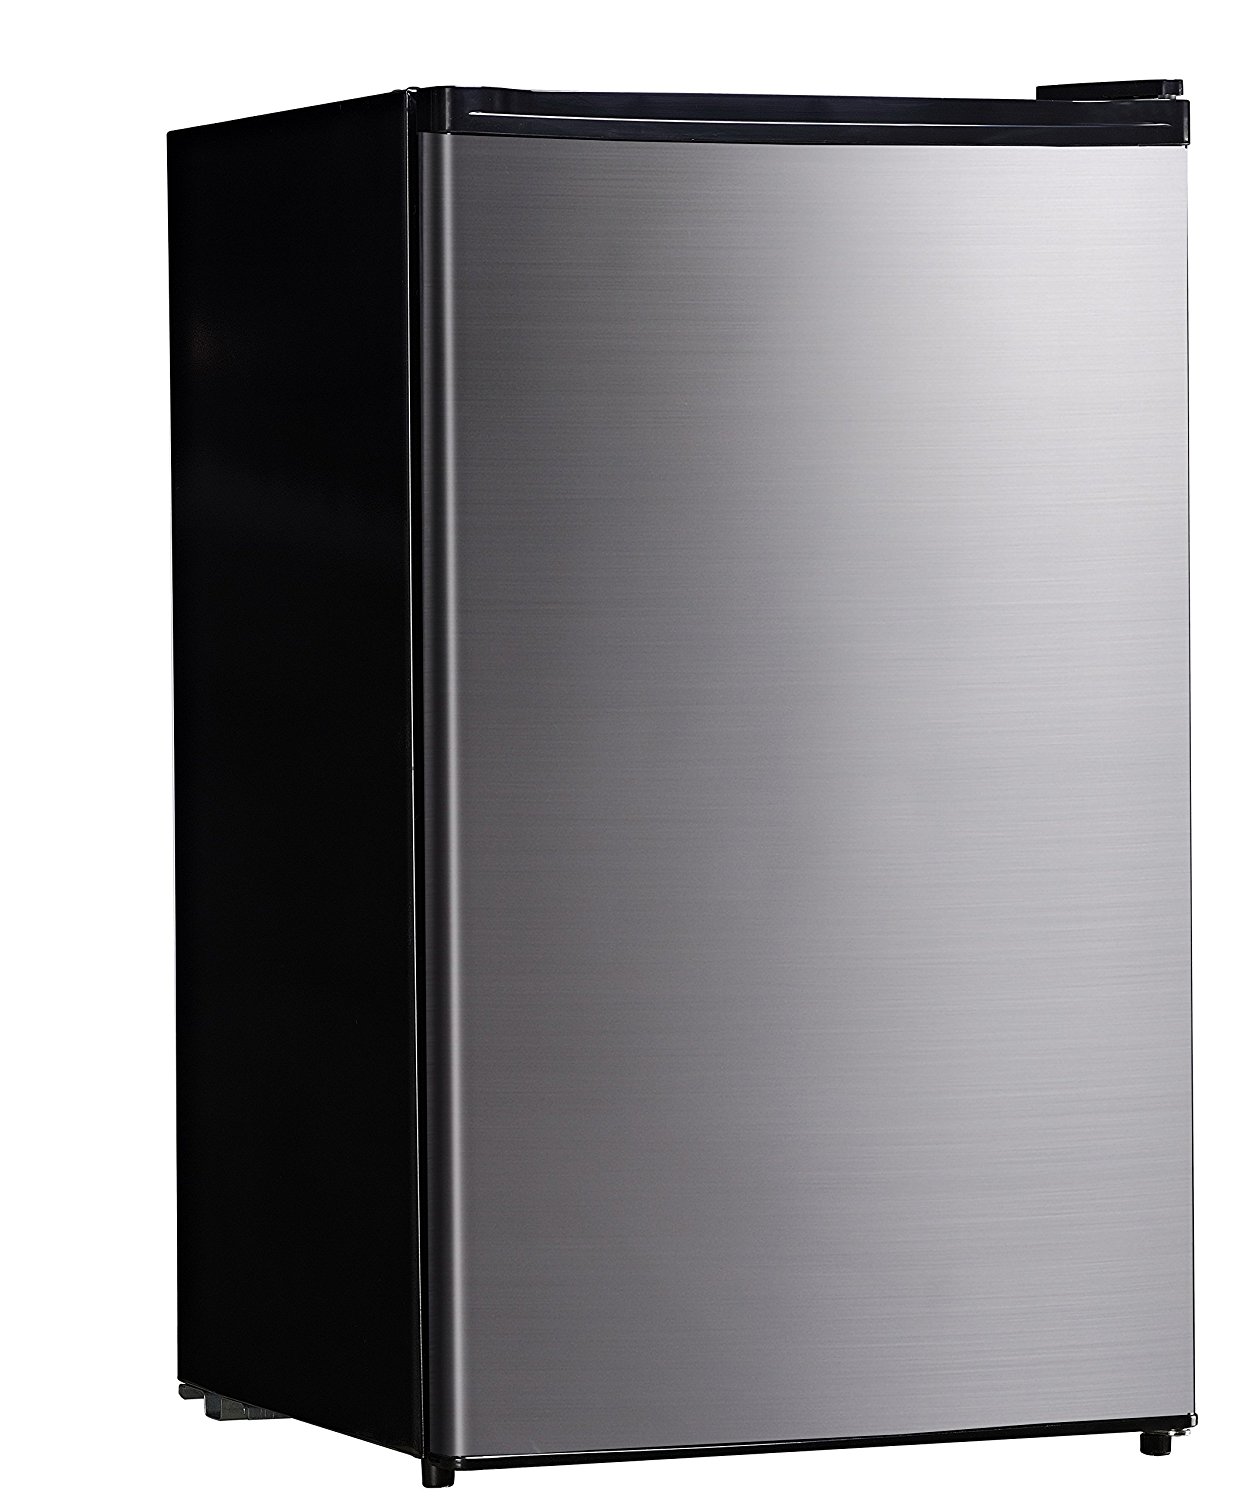 Midea WHS-160RSS1 Compact Single Reversible Door Refrigerator and Freezer, 4.4 Cubic Feet, Stainless Steel